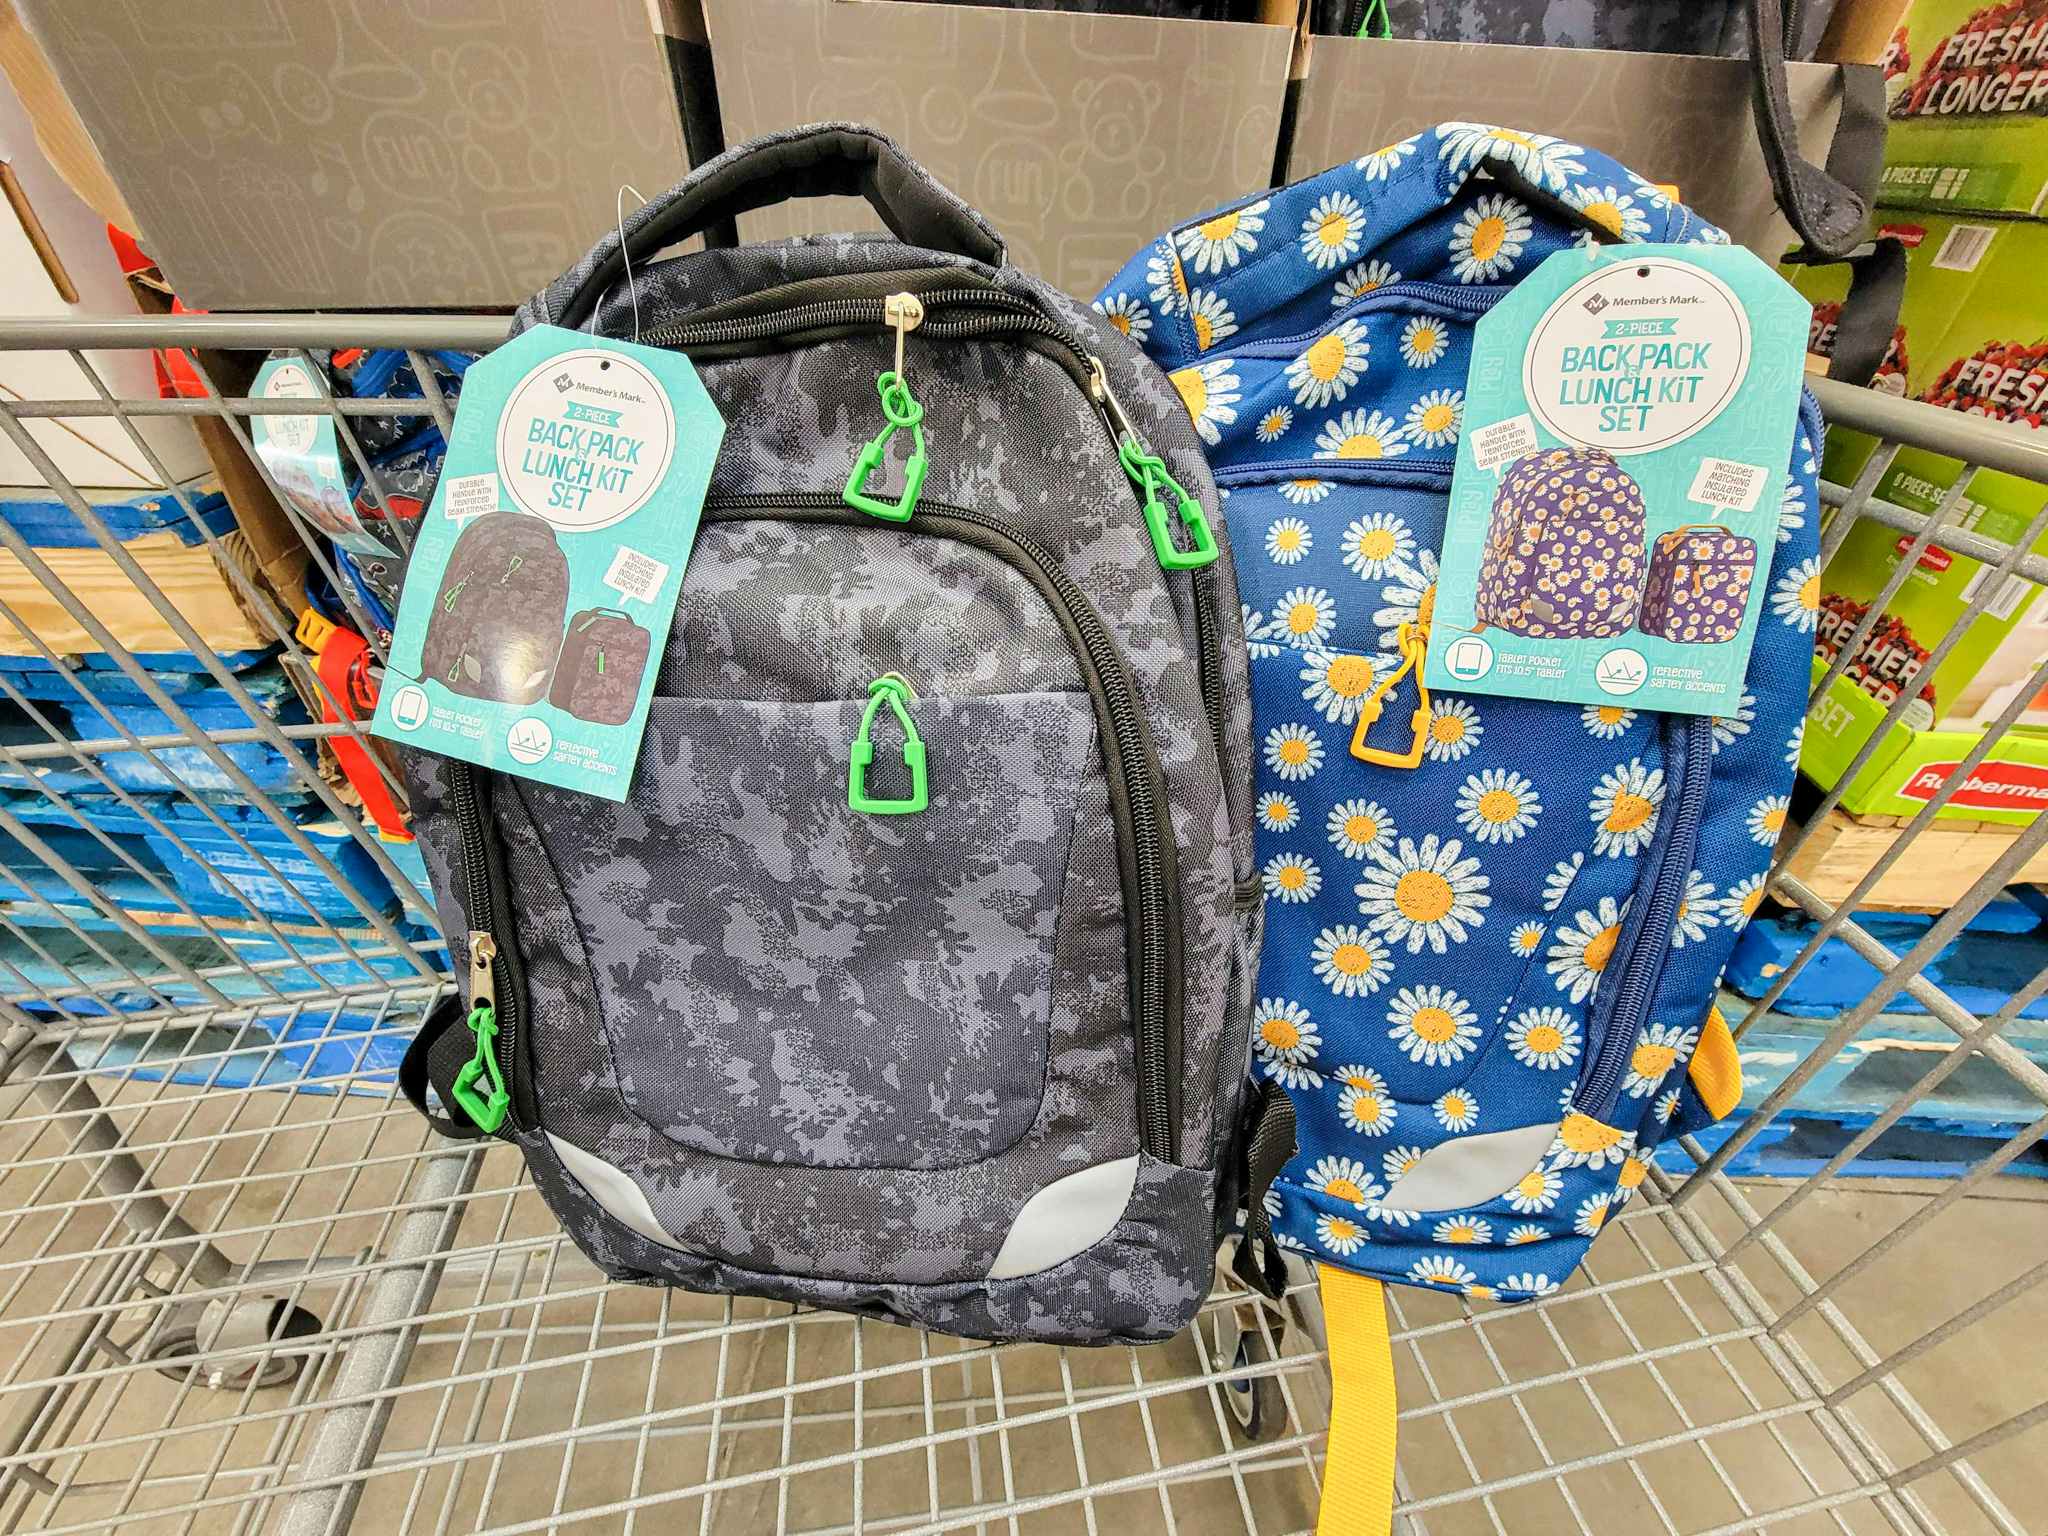 2 backpacks in a cart, that come with a matching lunch box